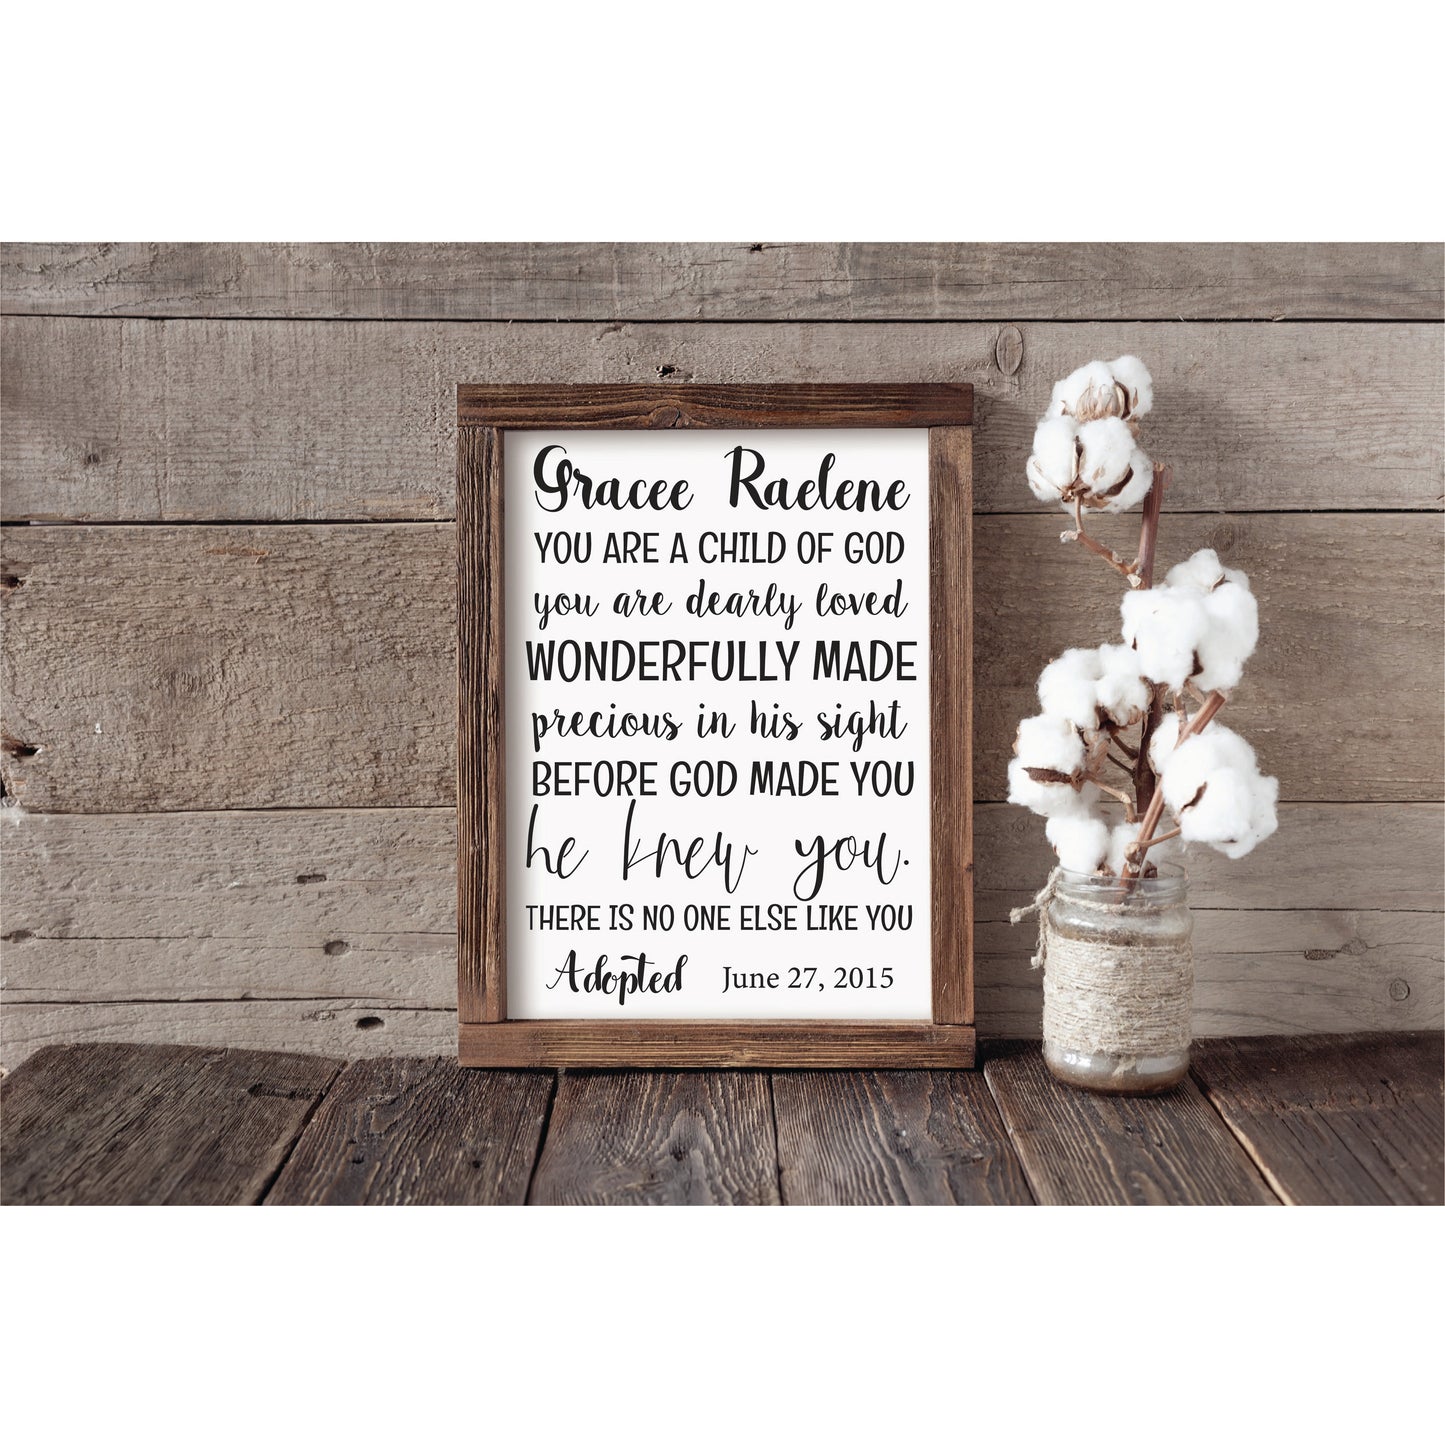 Ours | Christian Decor | Framed Wood Sign | Adoption Sign | Personalized